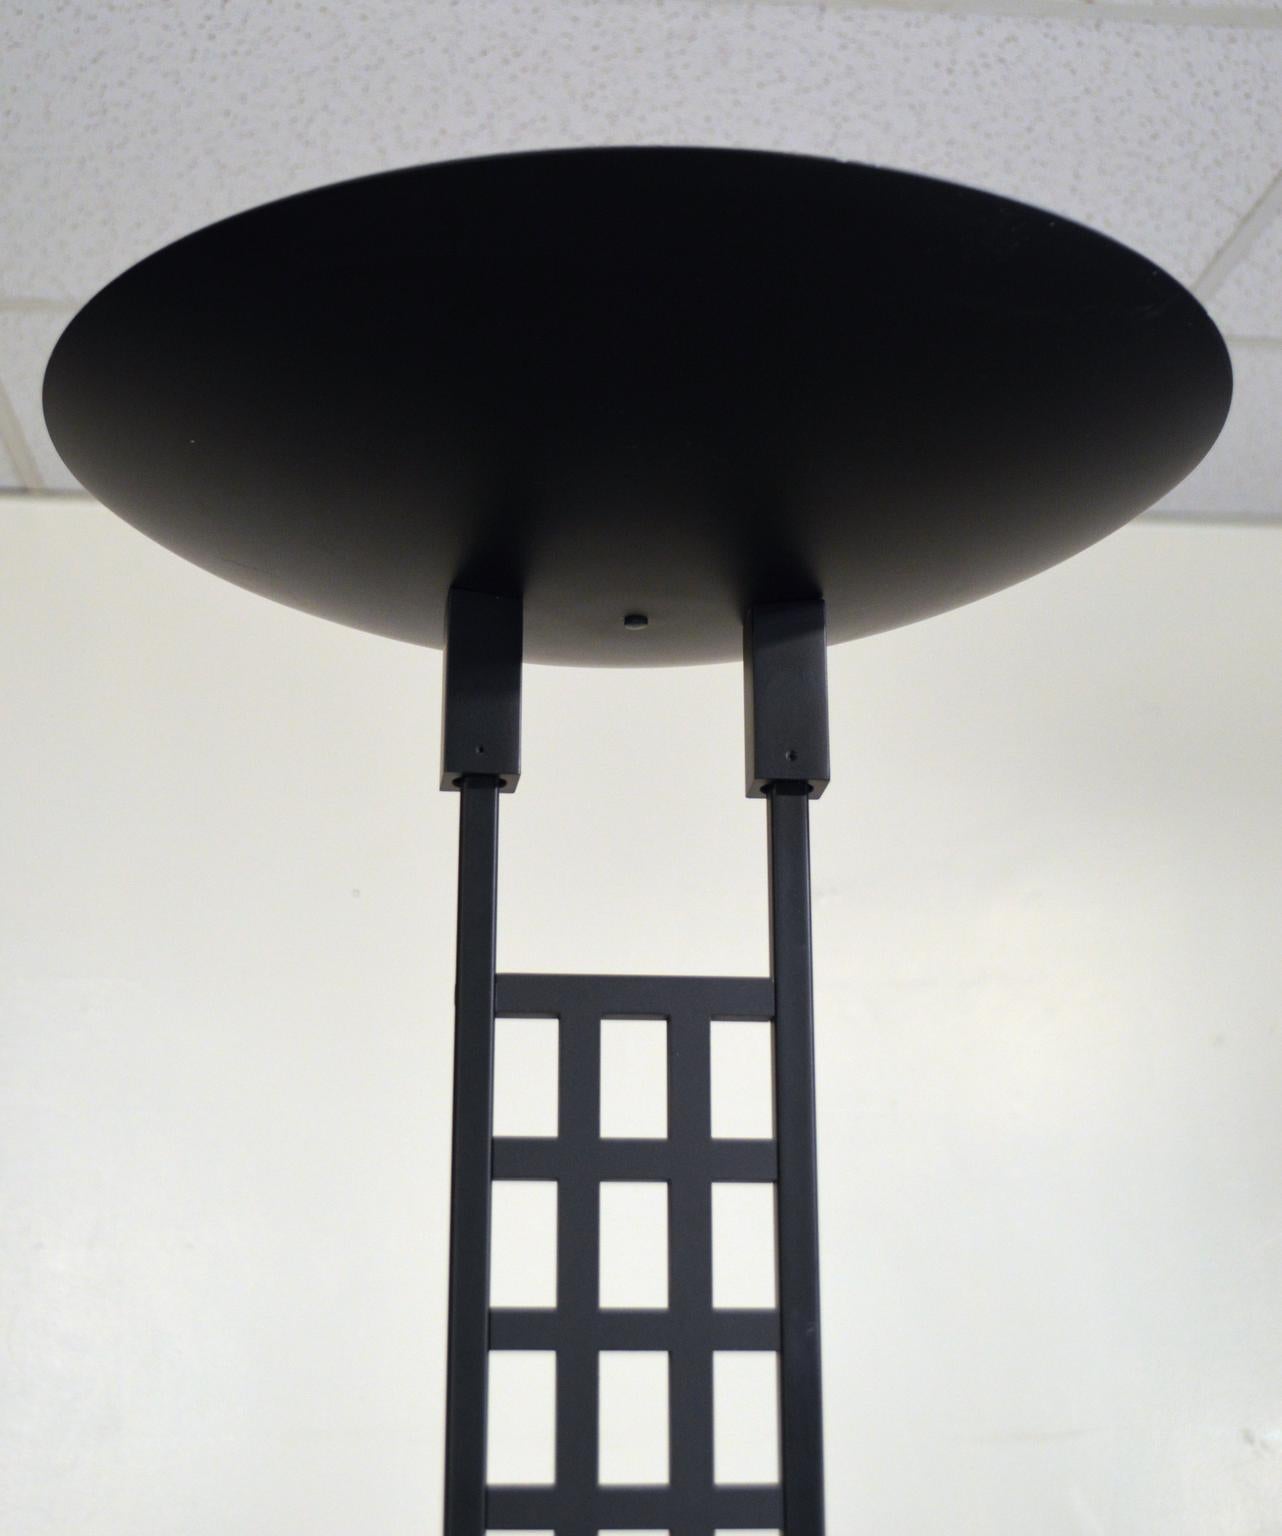 American Pair Black Post-Modern Torchiere Lamps by Robert Sonneman for Kovacs, 1980's For Sale